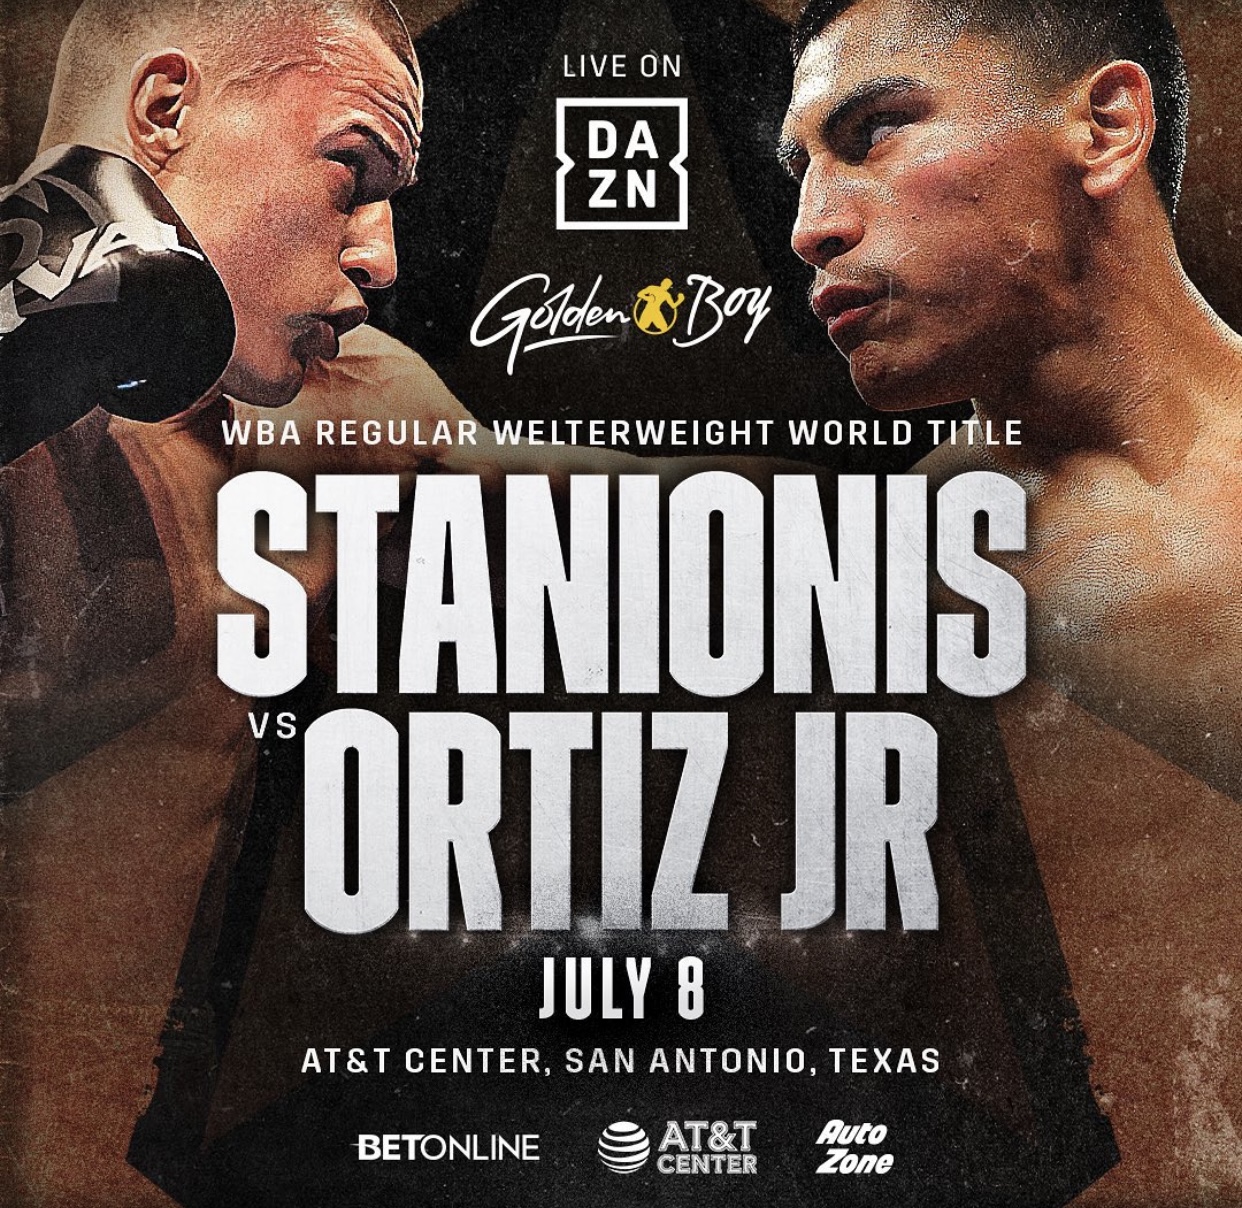 Stanionis-Ortiz Jr. will be a special fight 